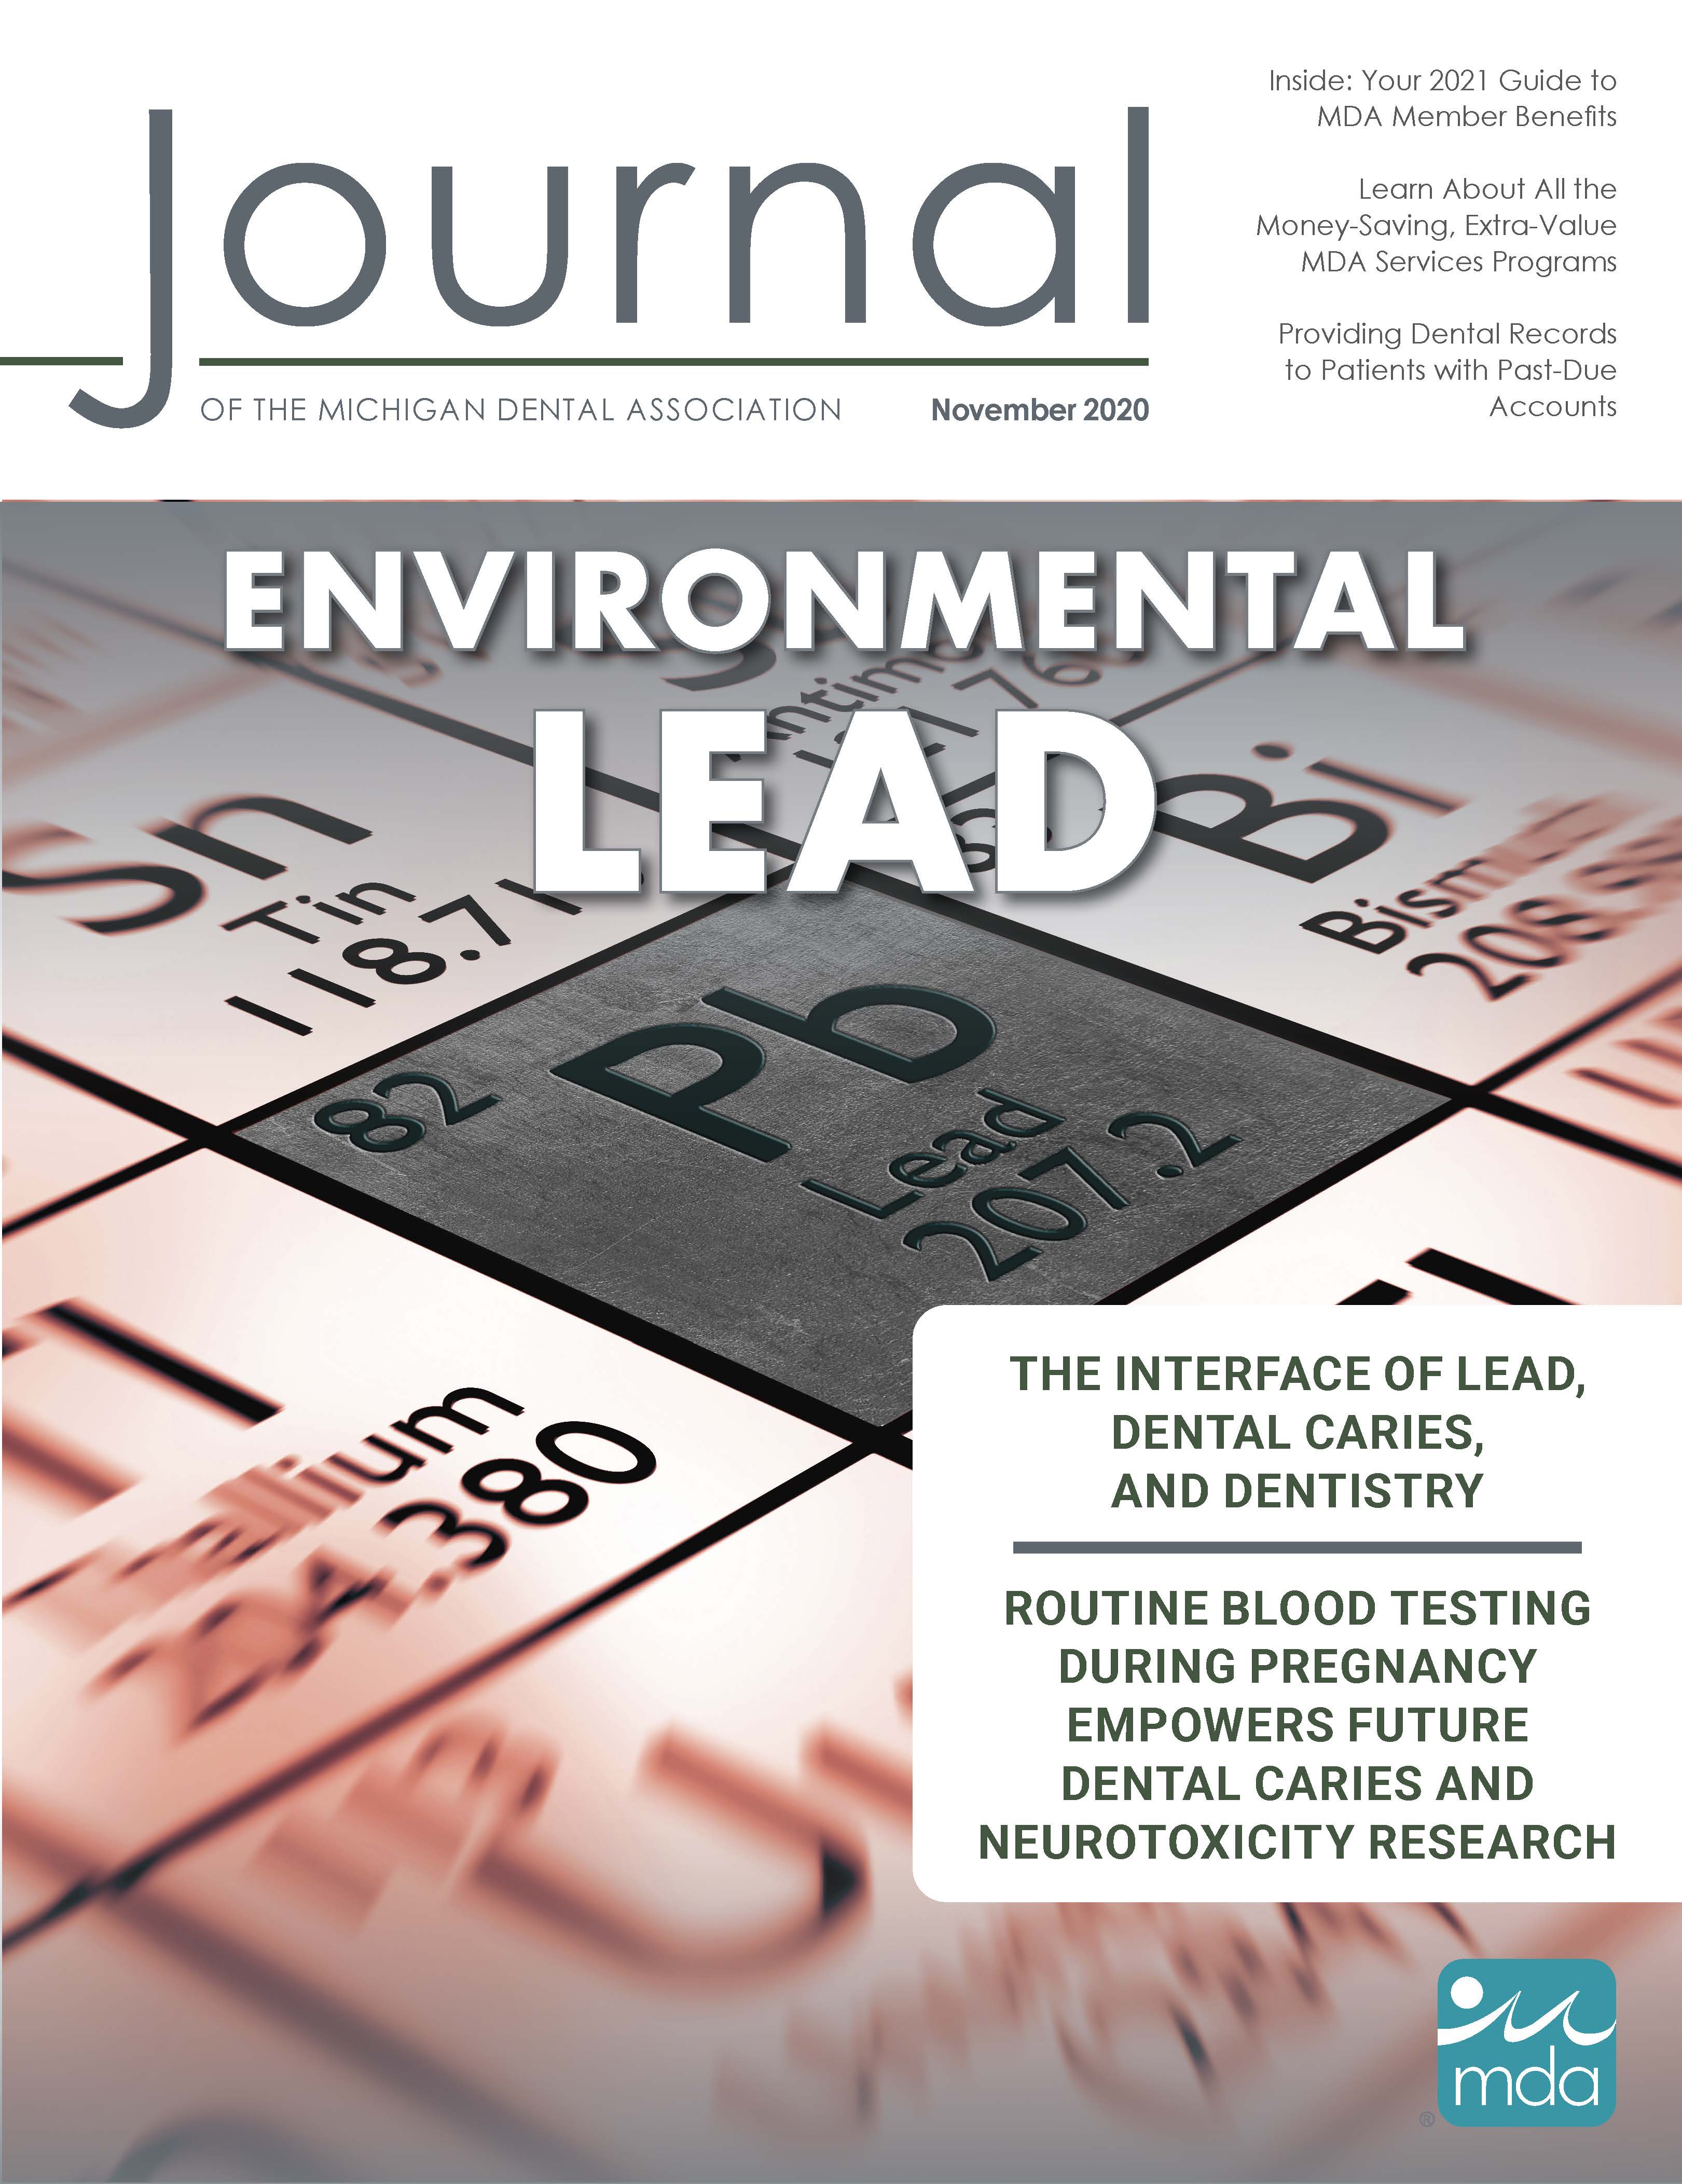 Cover of the Journal of the Michigan Dental Association with a close up of the chemical symbol for lead on the periodic table.